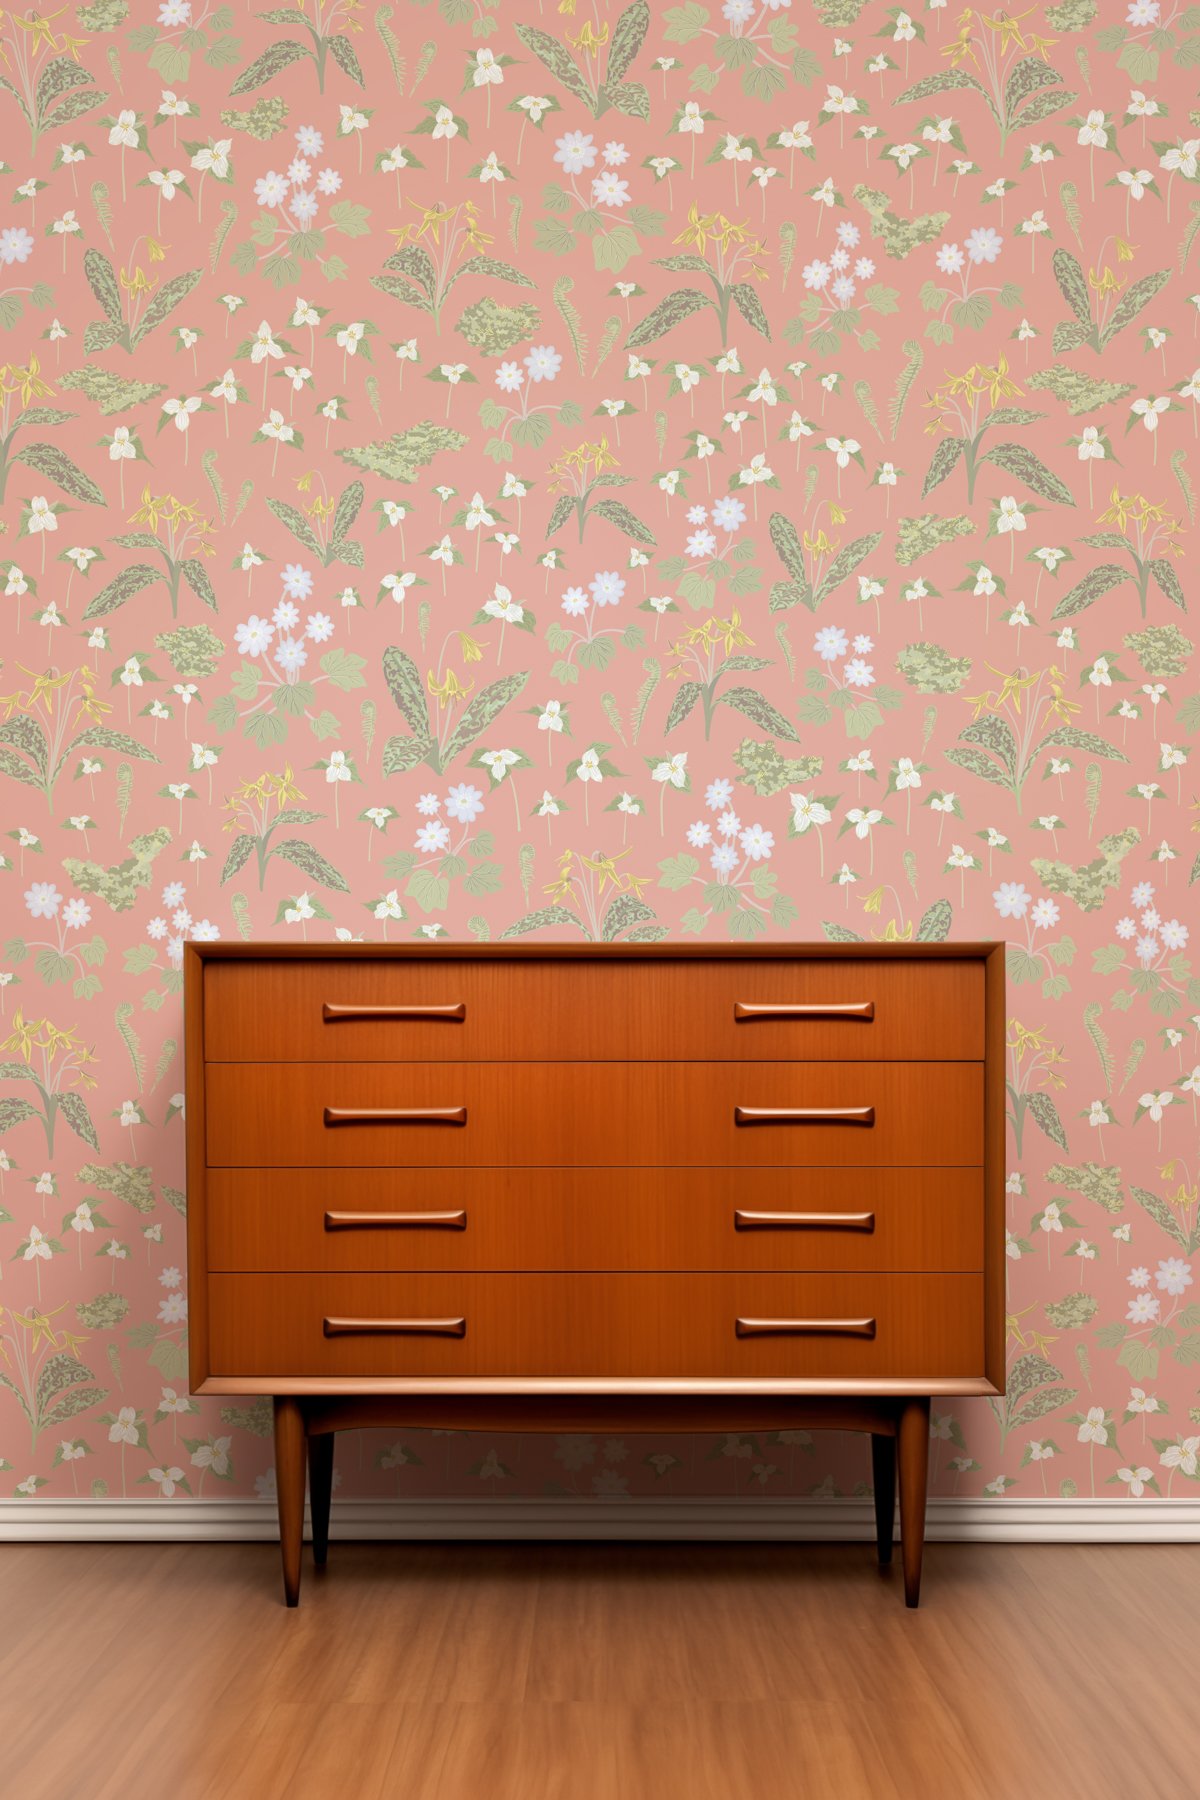 Kate Golding Forest Blooms (Pink) Wallpaper.  Modern wallcoverings and interior decor.  